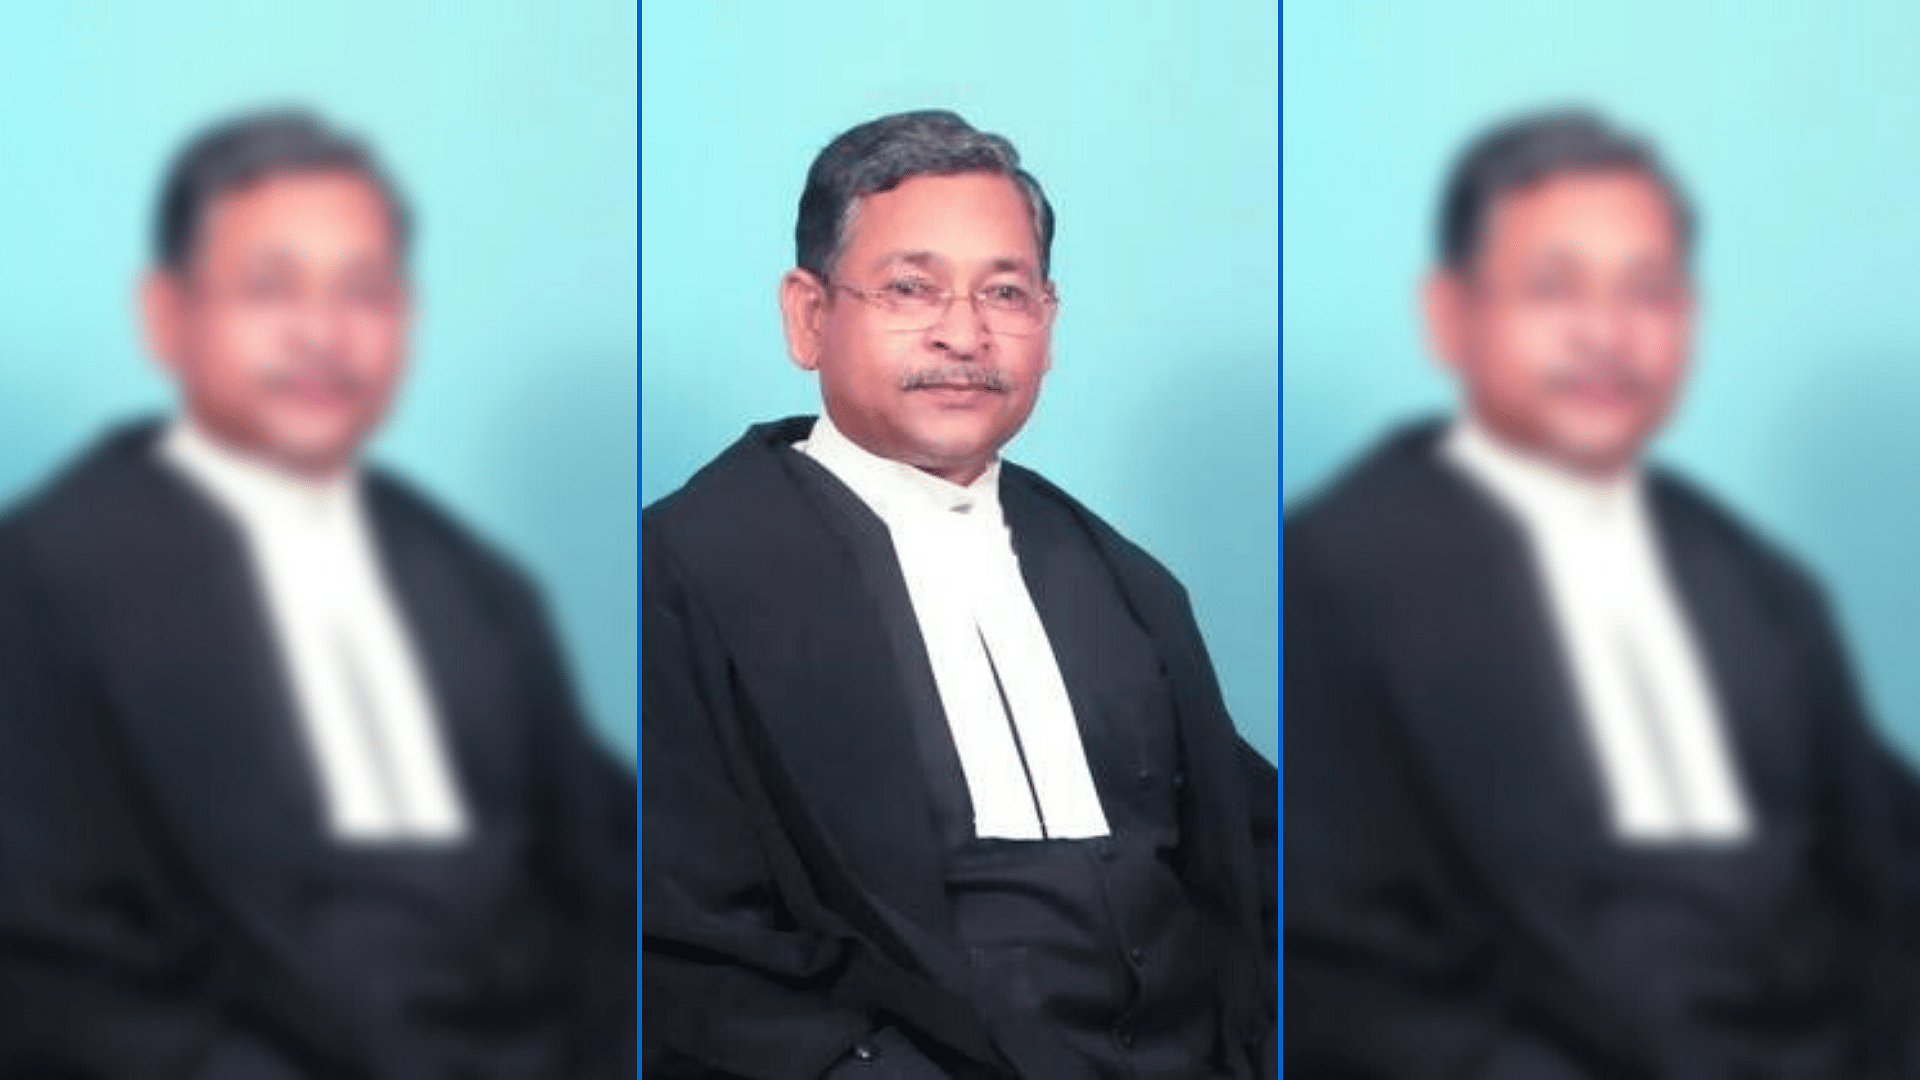 CBI has booked Allahabad High Court judge Justice SN Shukla in a corruption case.